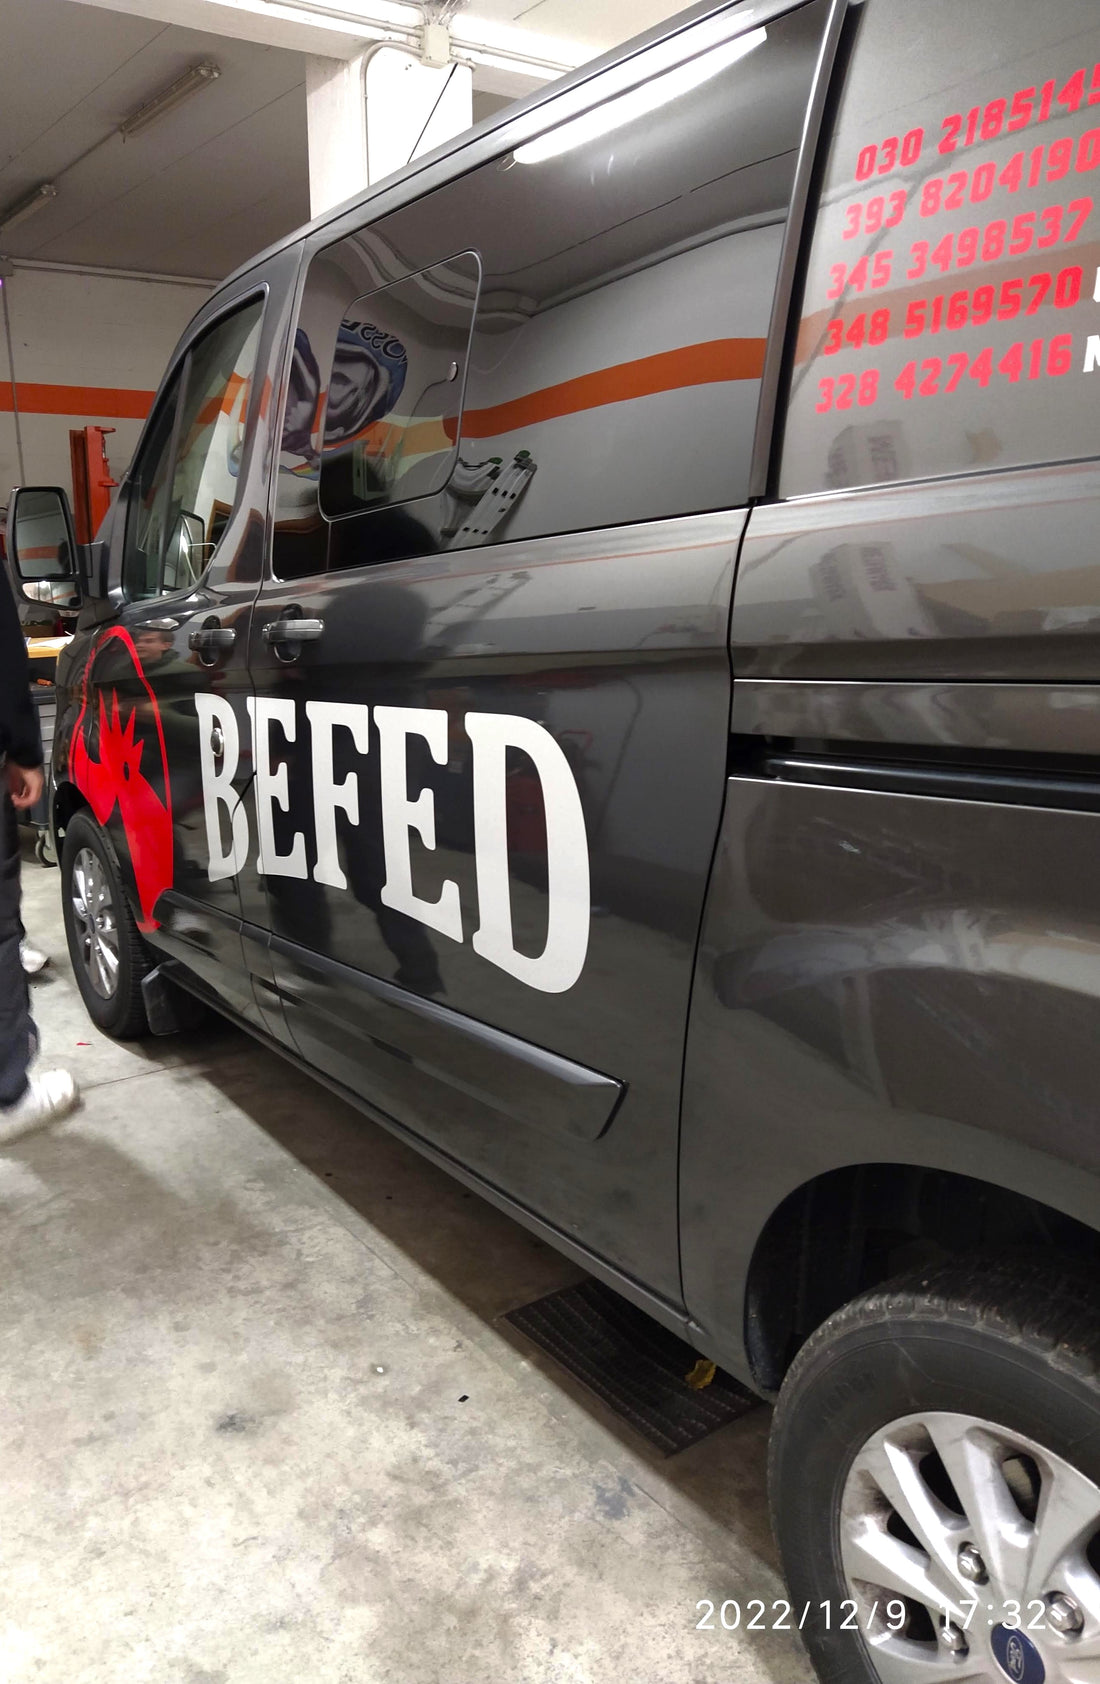 befed furgone wrapping